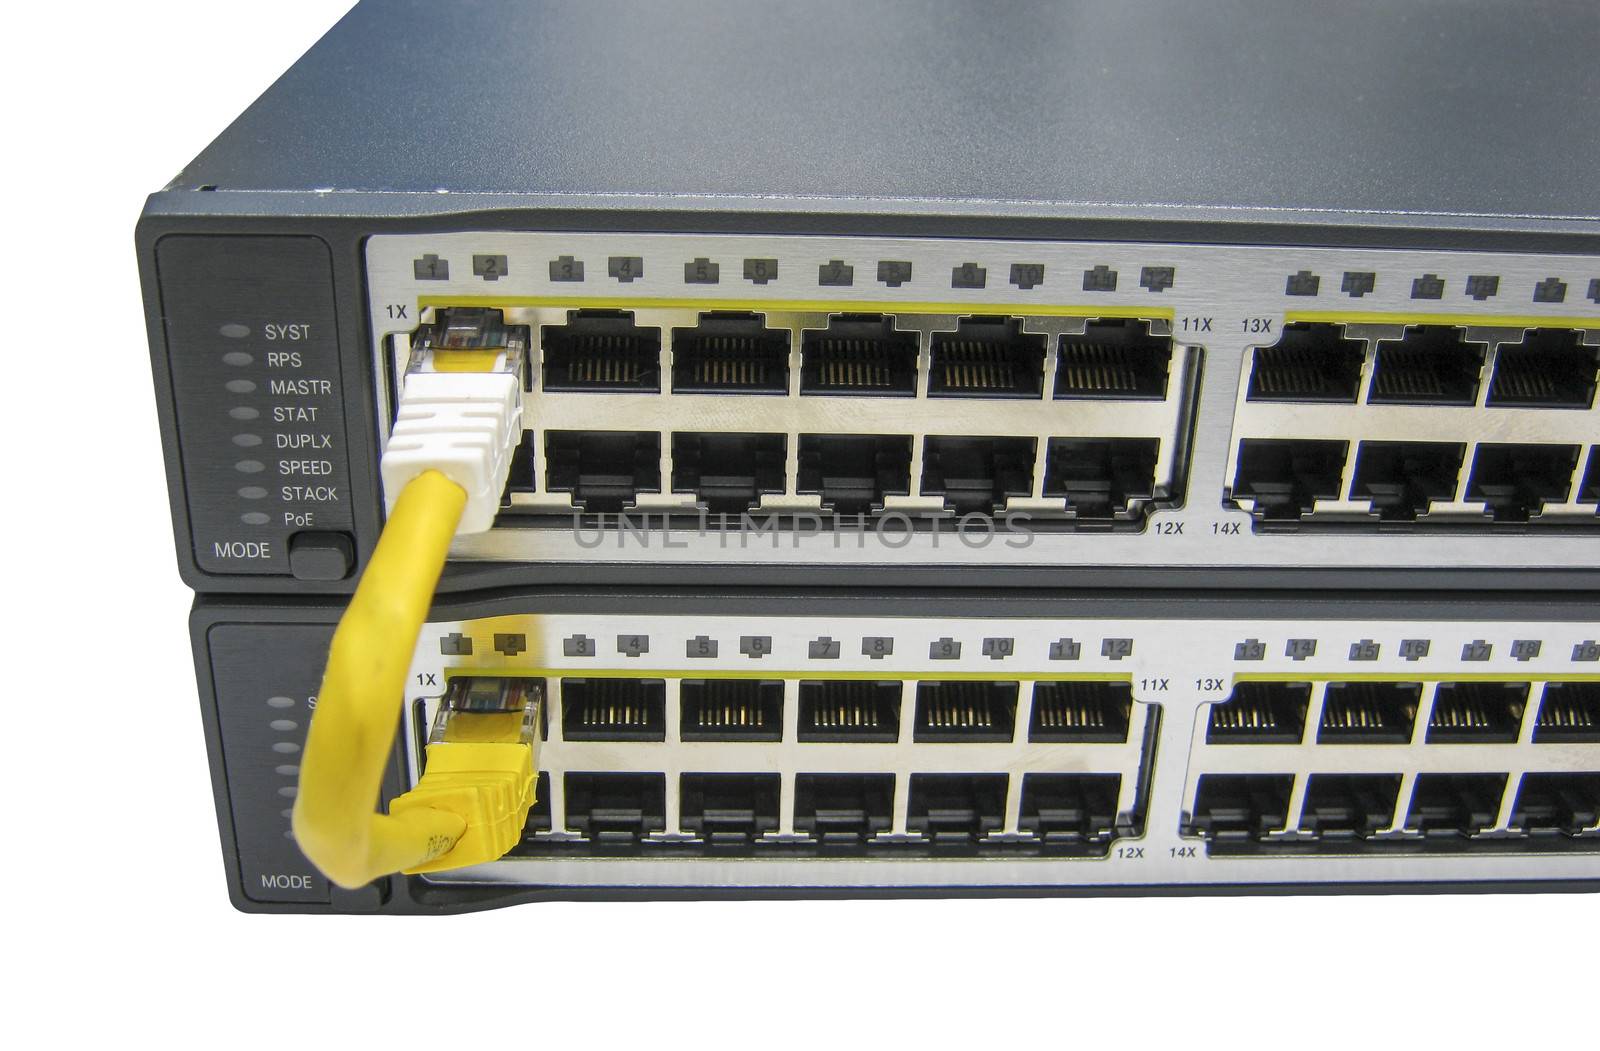 Ethernet cables connected switch to switch by Sorapop